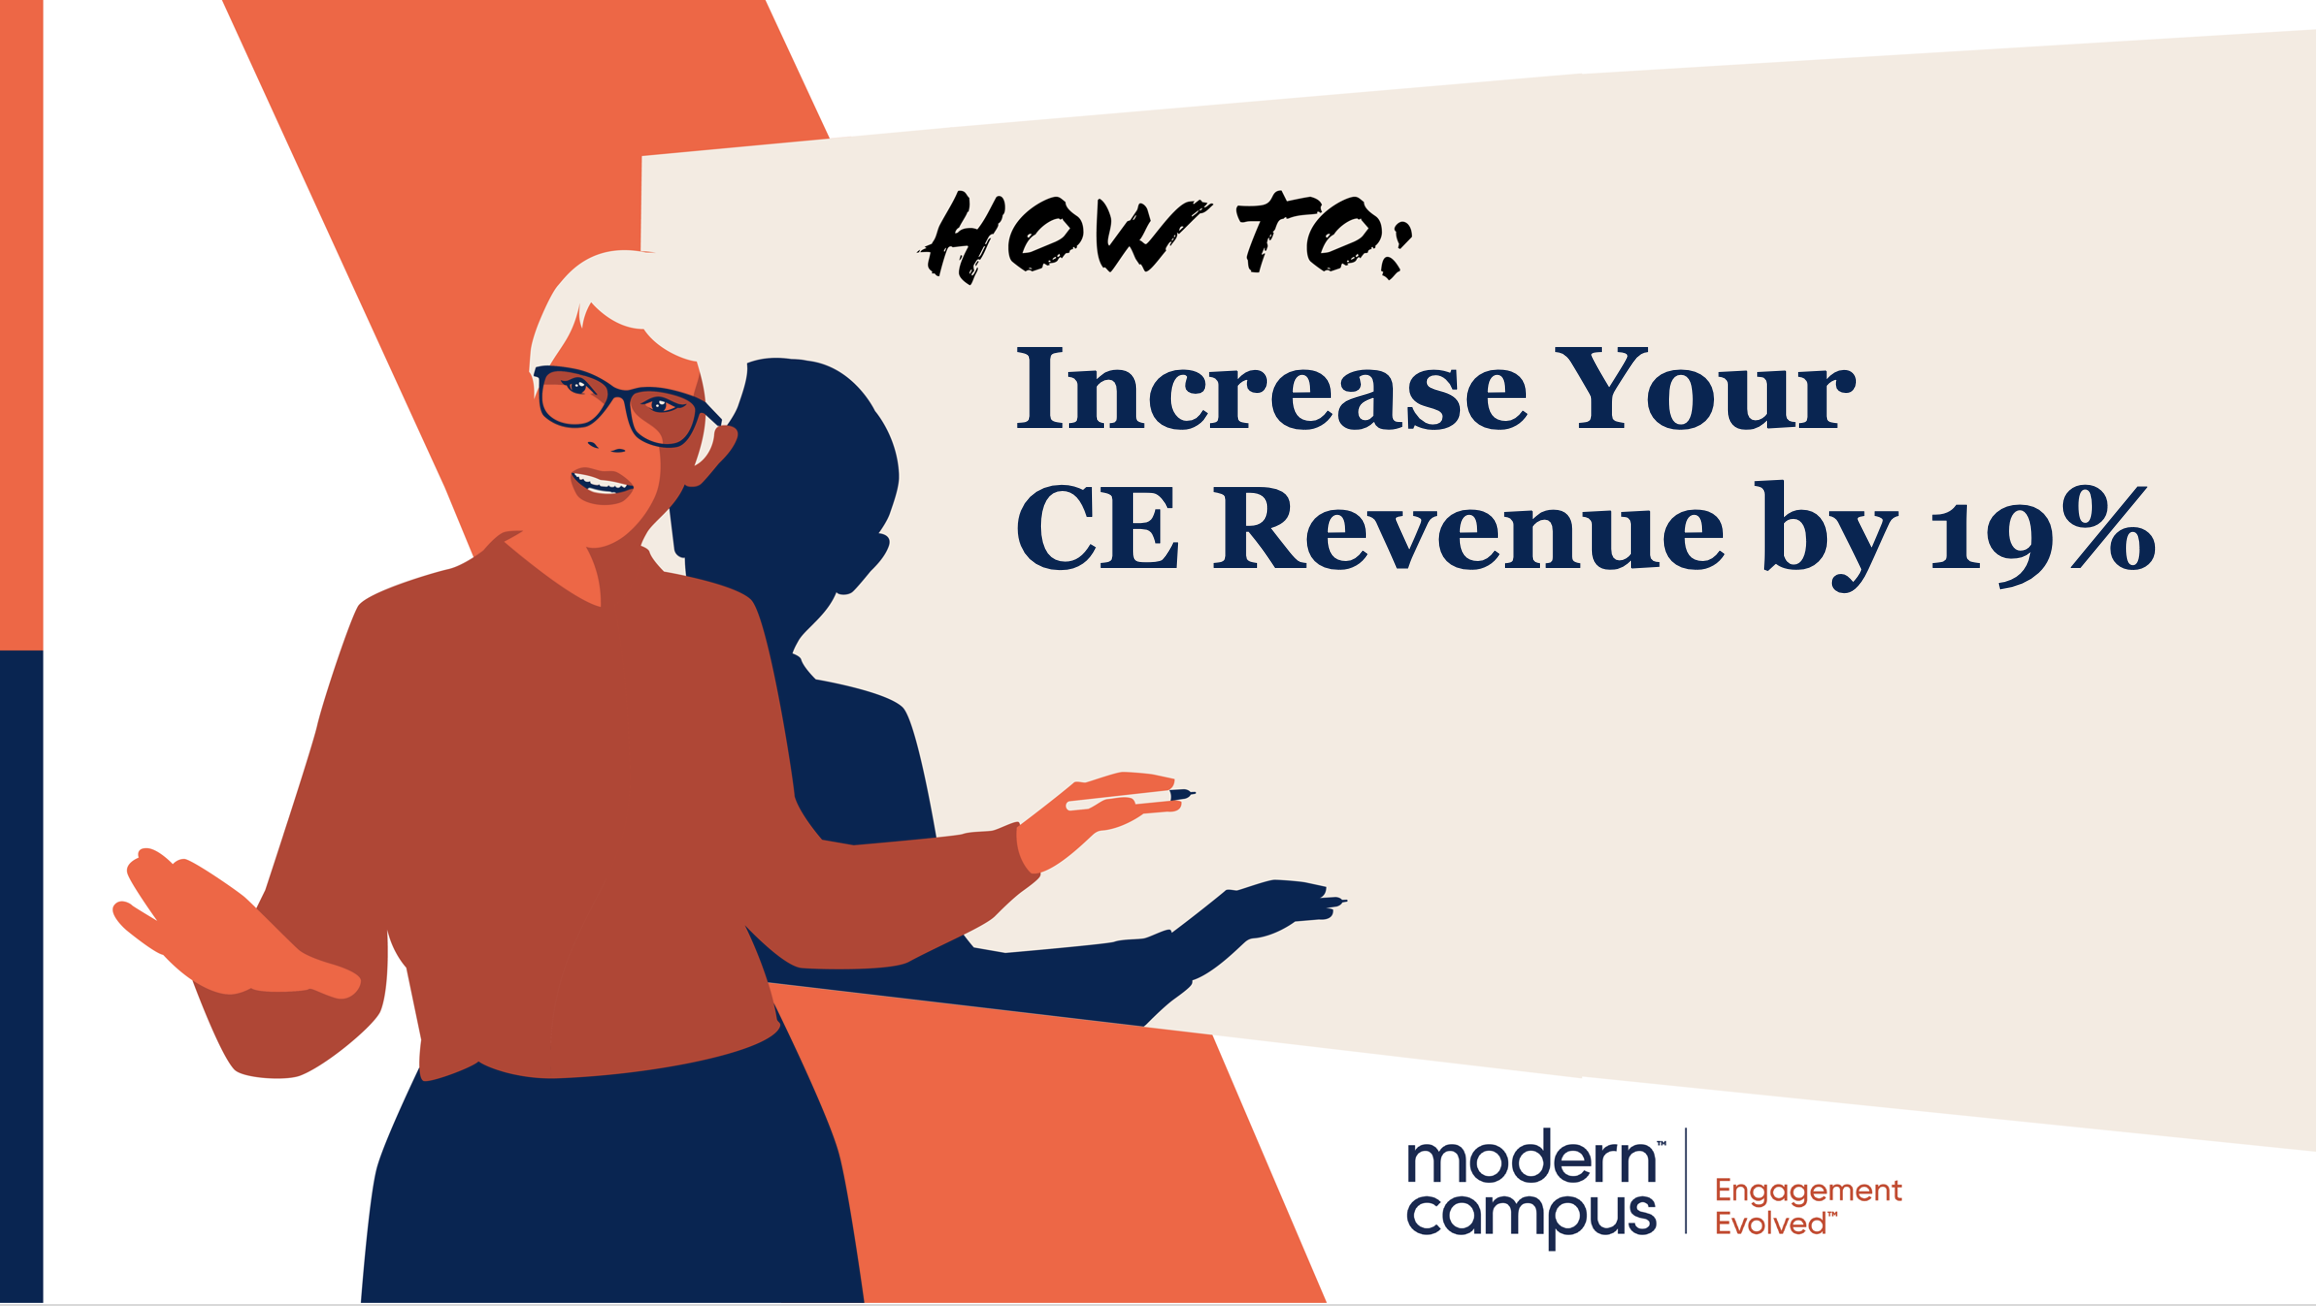 increase your CE revenue by 19%